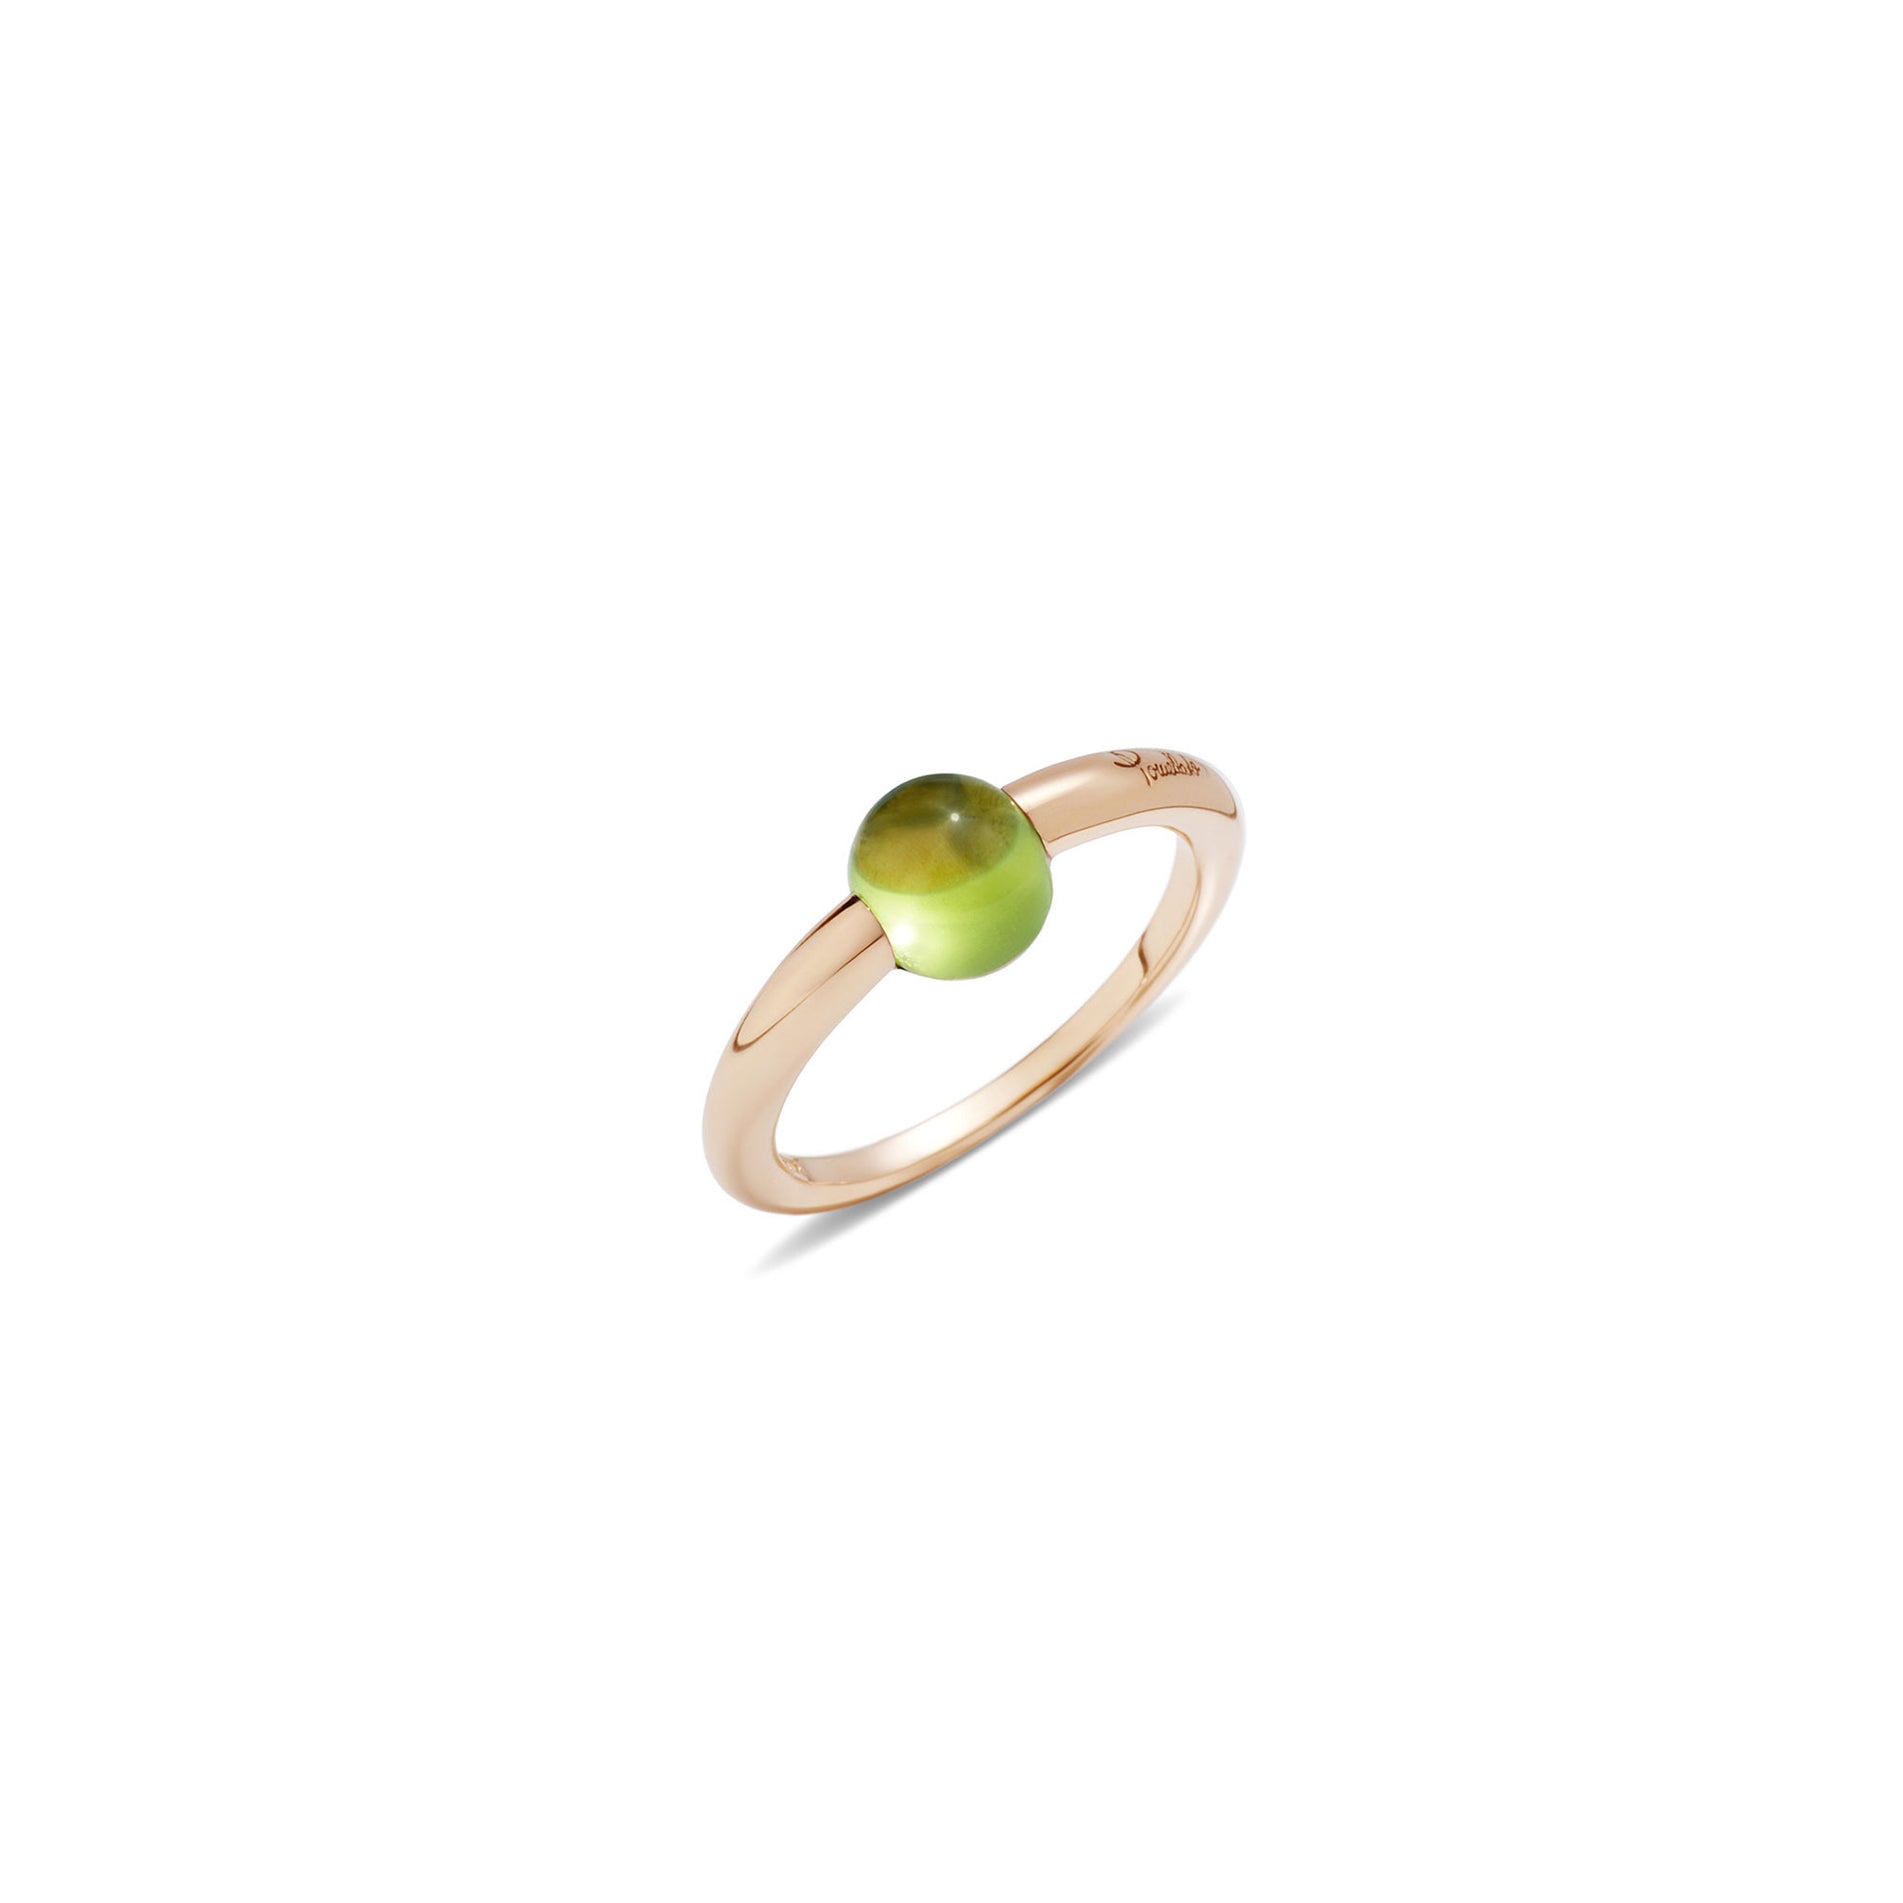 M'ama non M'ama Ring in 18k Rose Gold with Peridot - Orsini Jewellers NZ